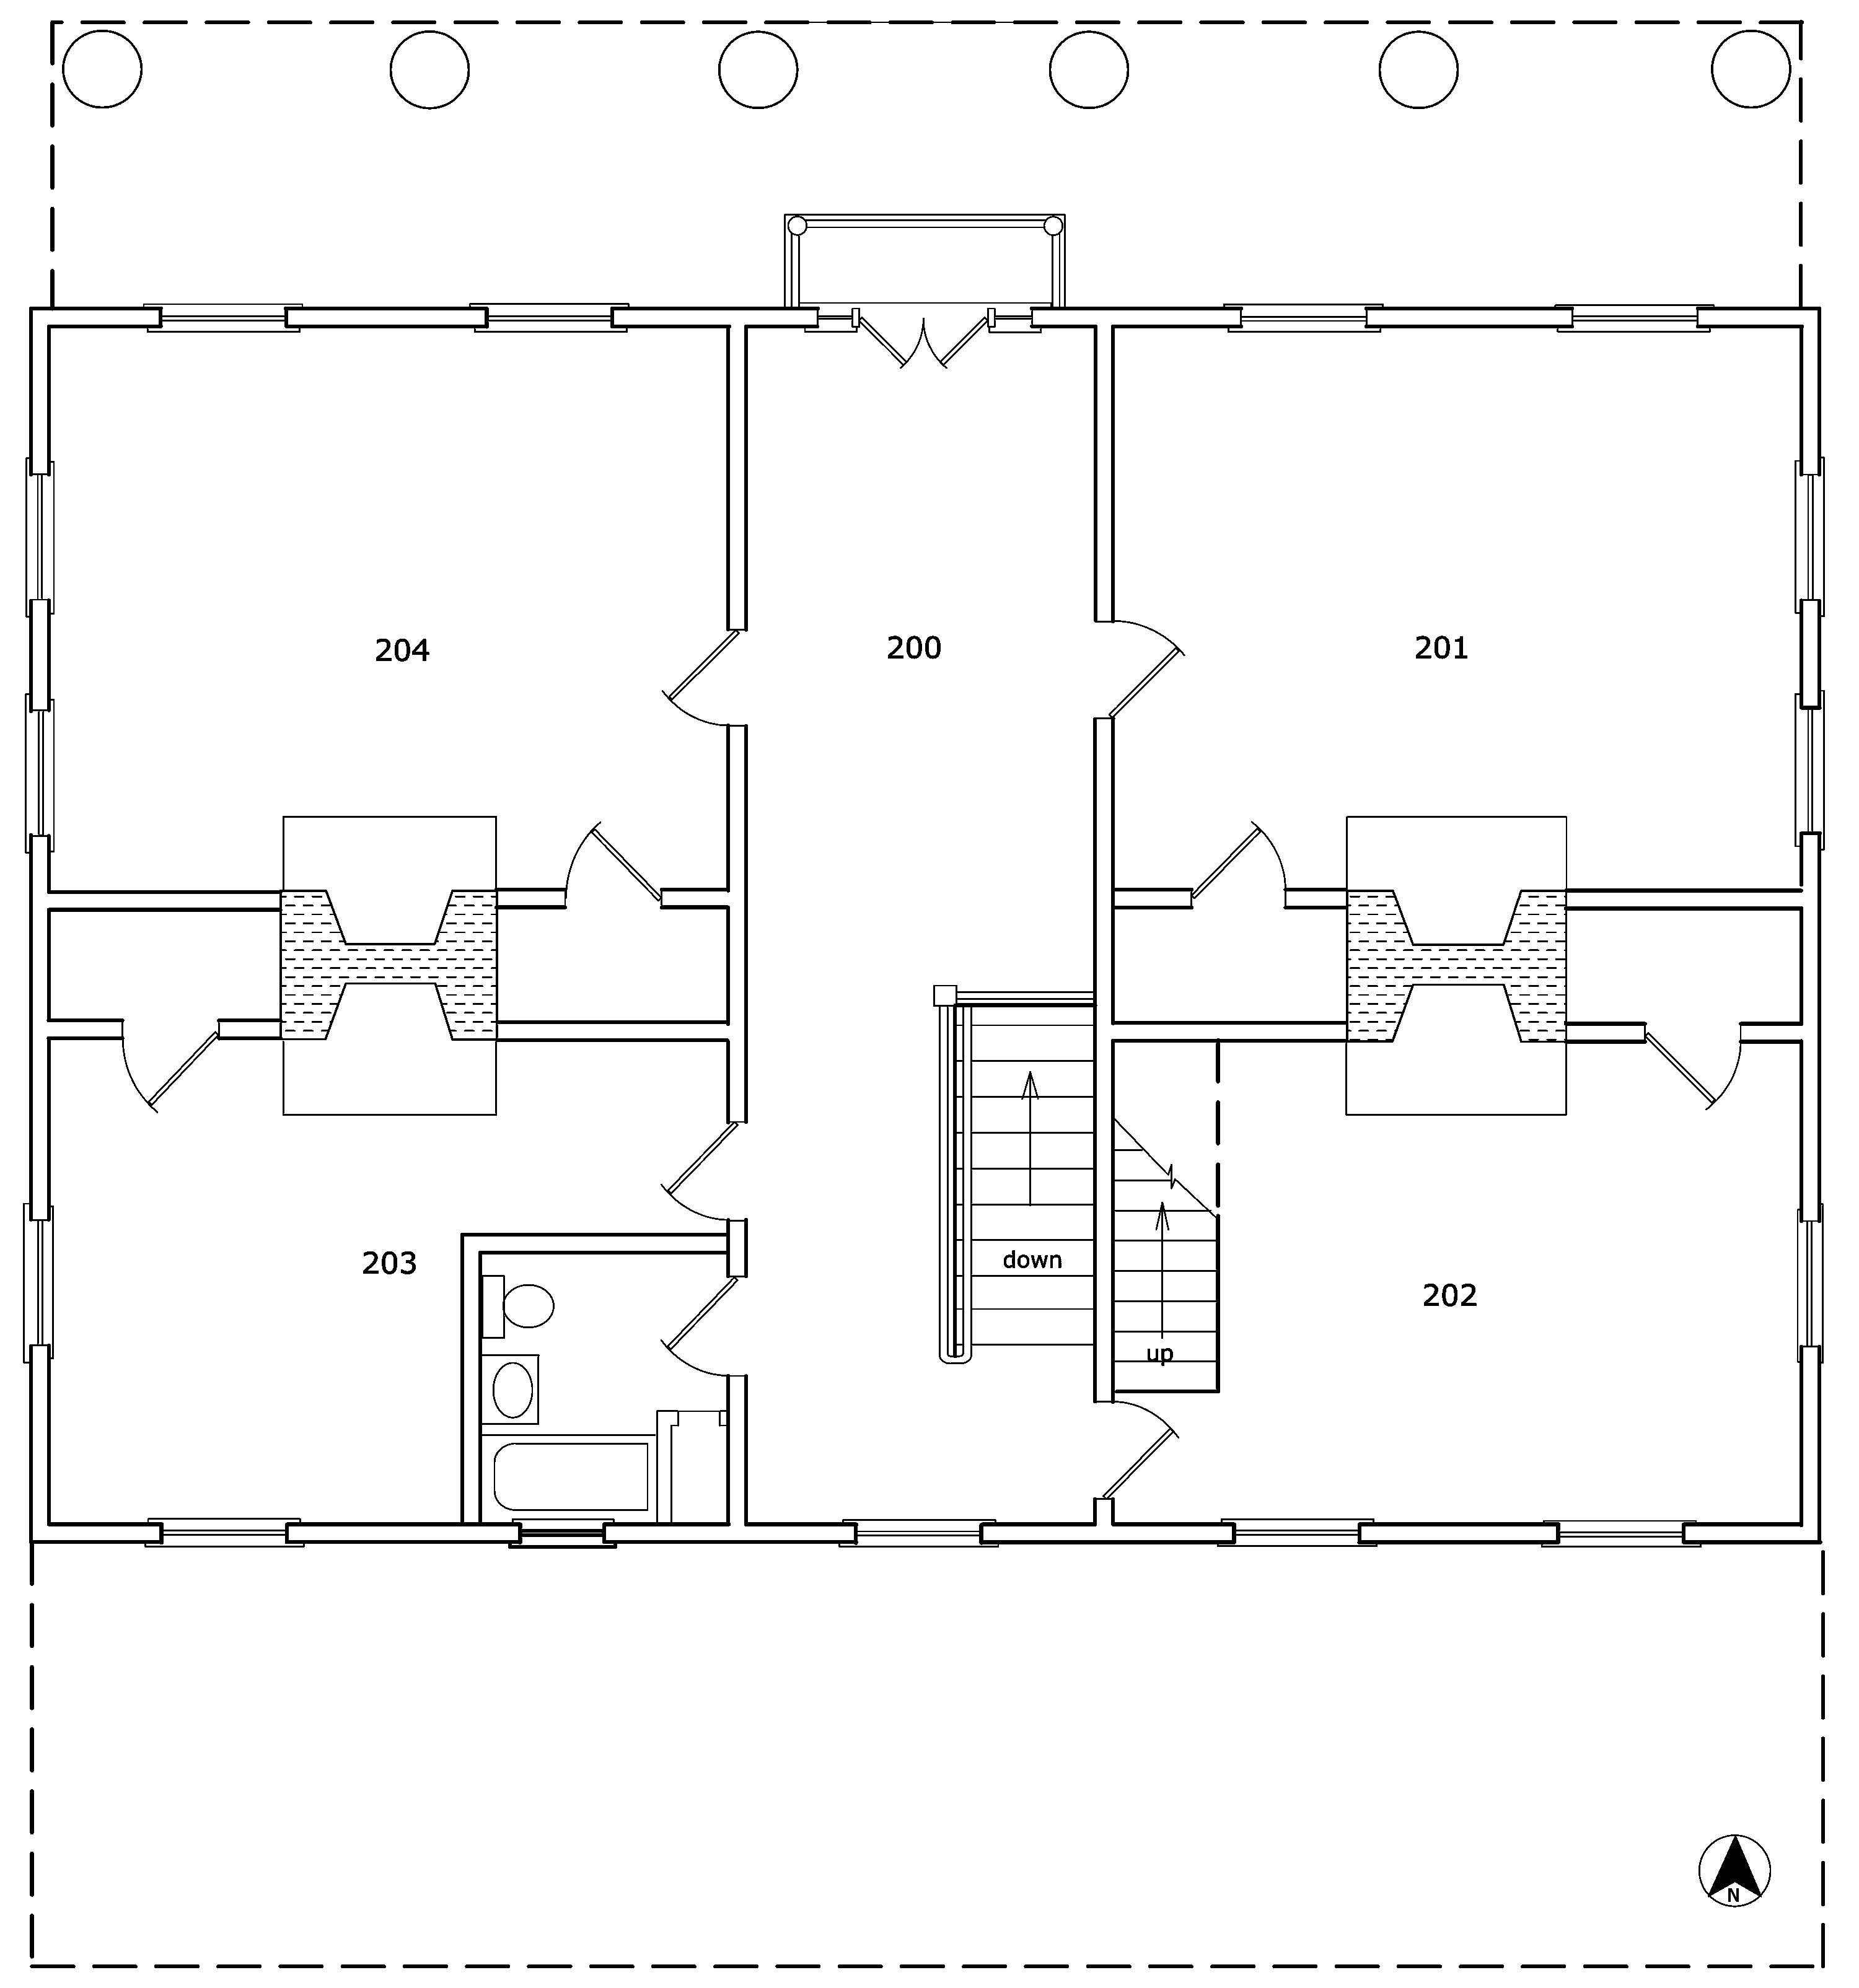 Figure 25. Plan of second floor of Holliday-Dorsey-Fife House as it 